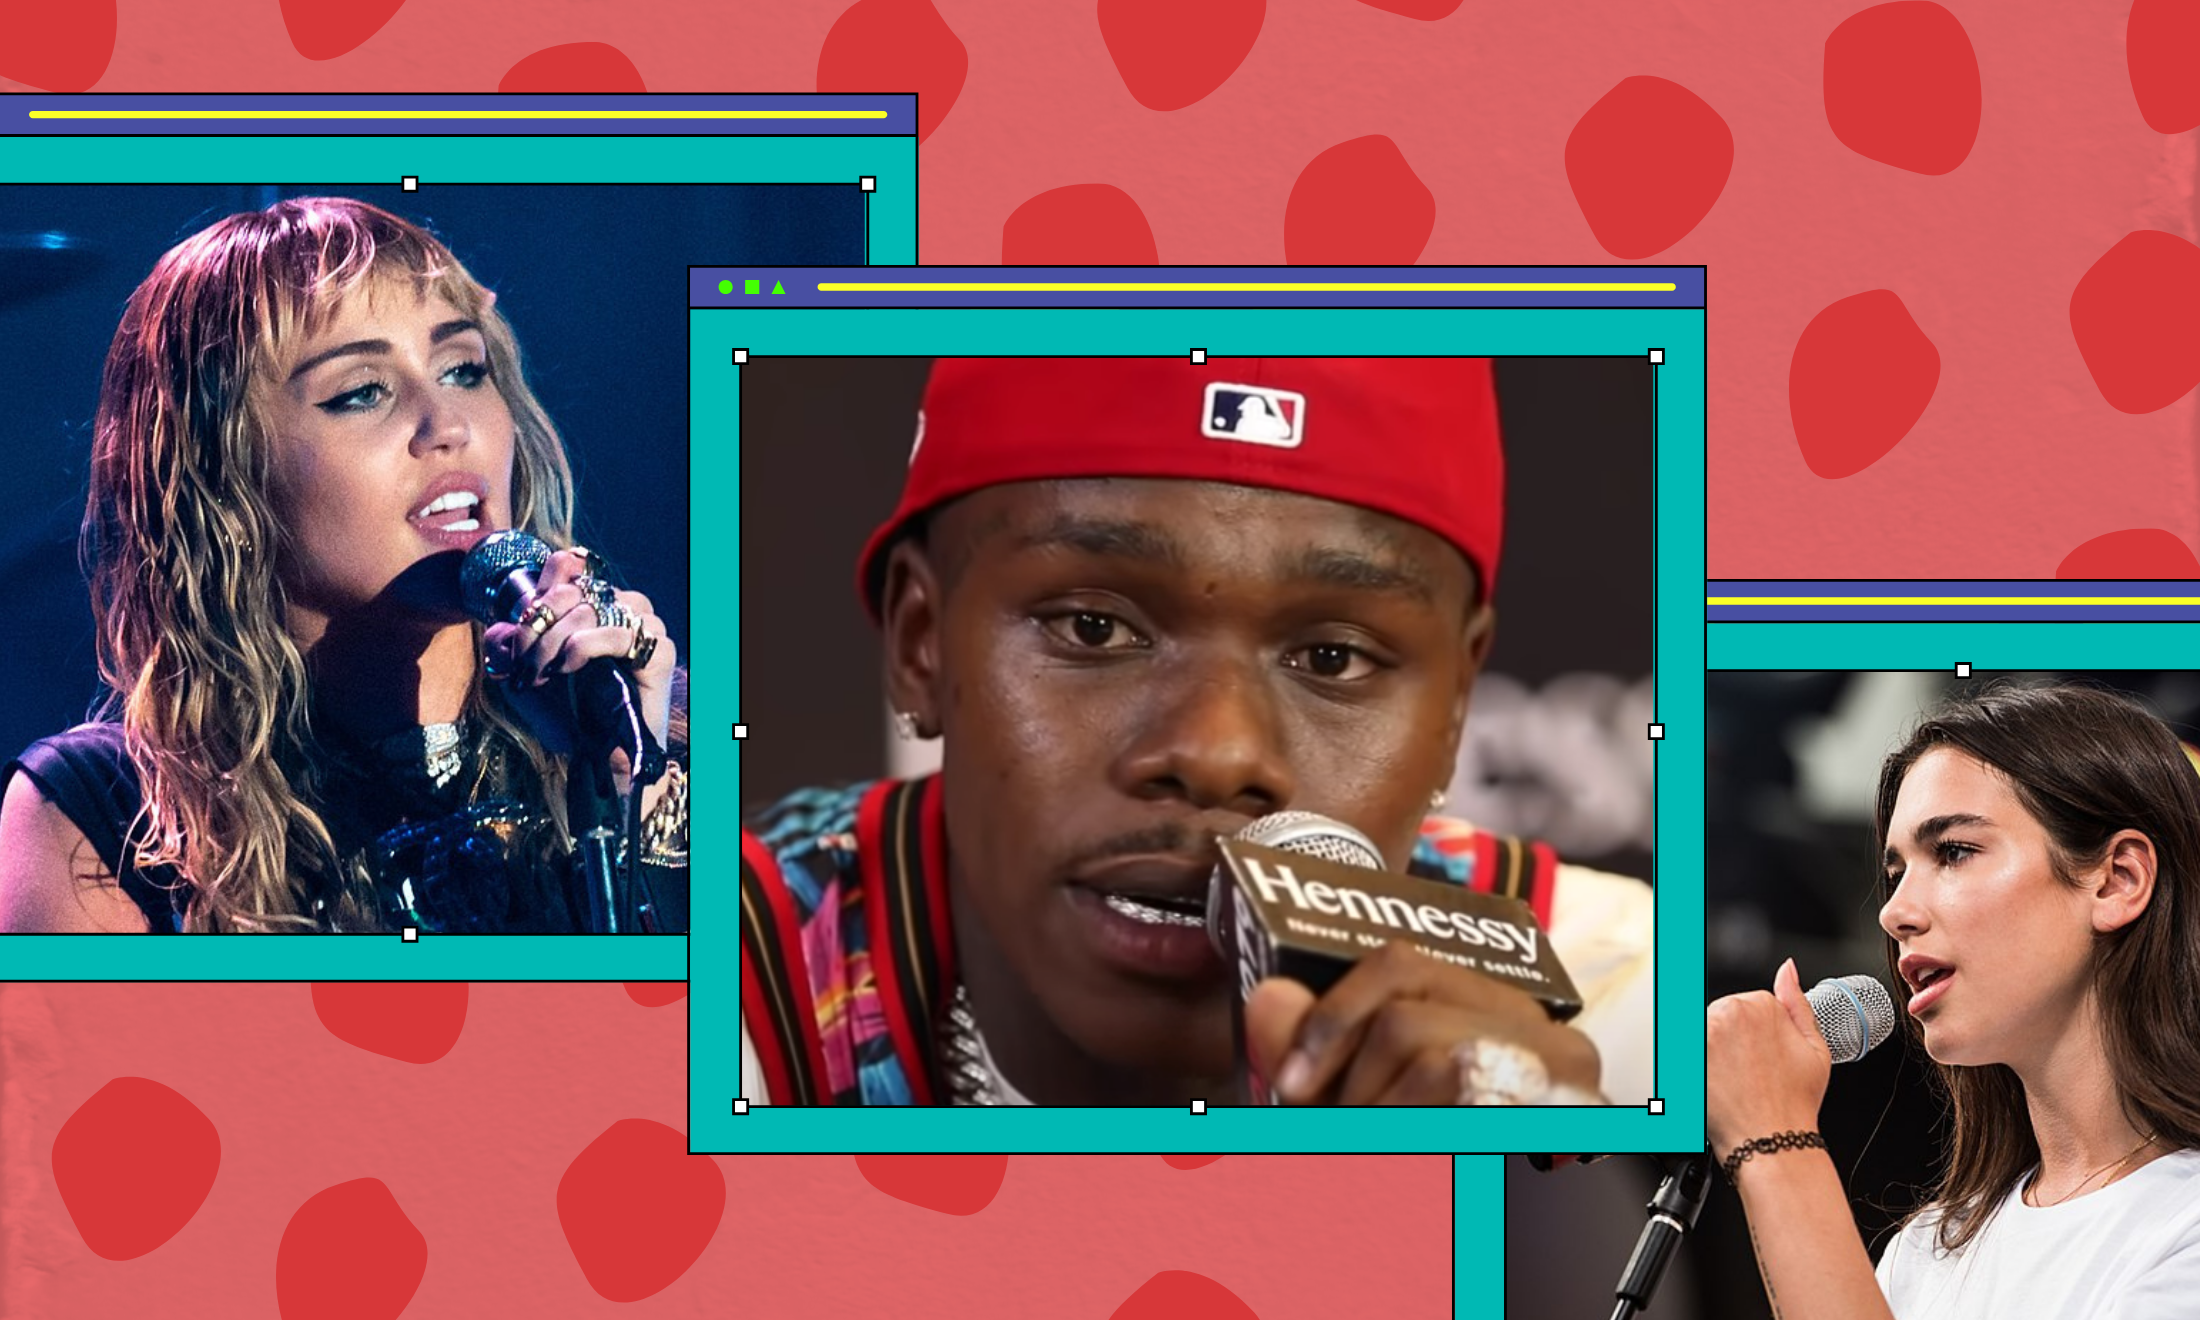 Five on it: education or cancellation? Miley Cyrus says DaBaby should have a chance to change